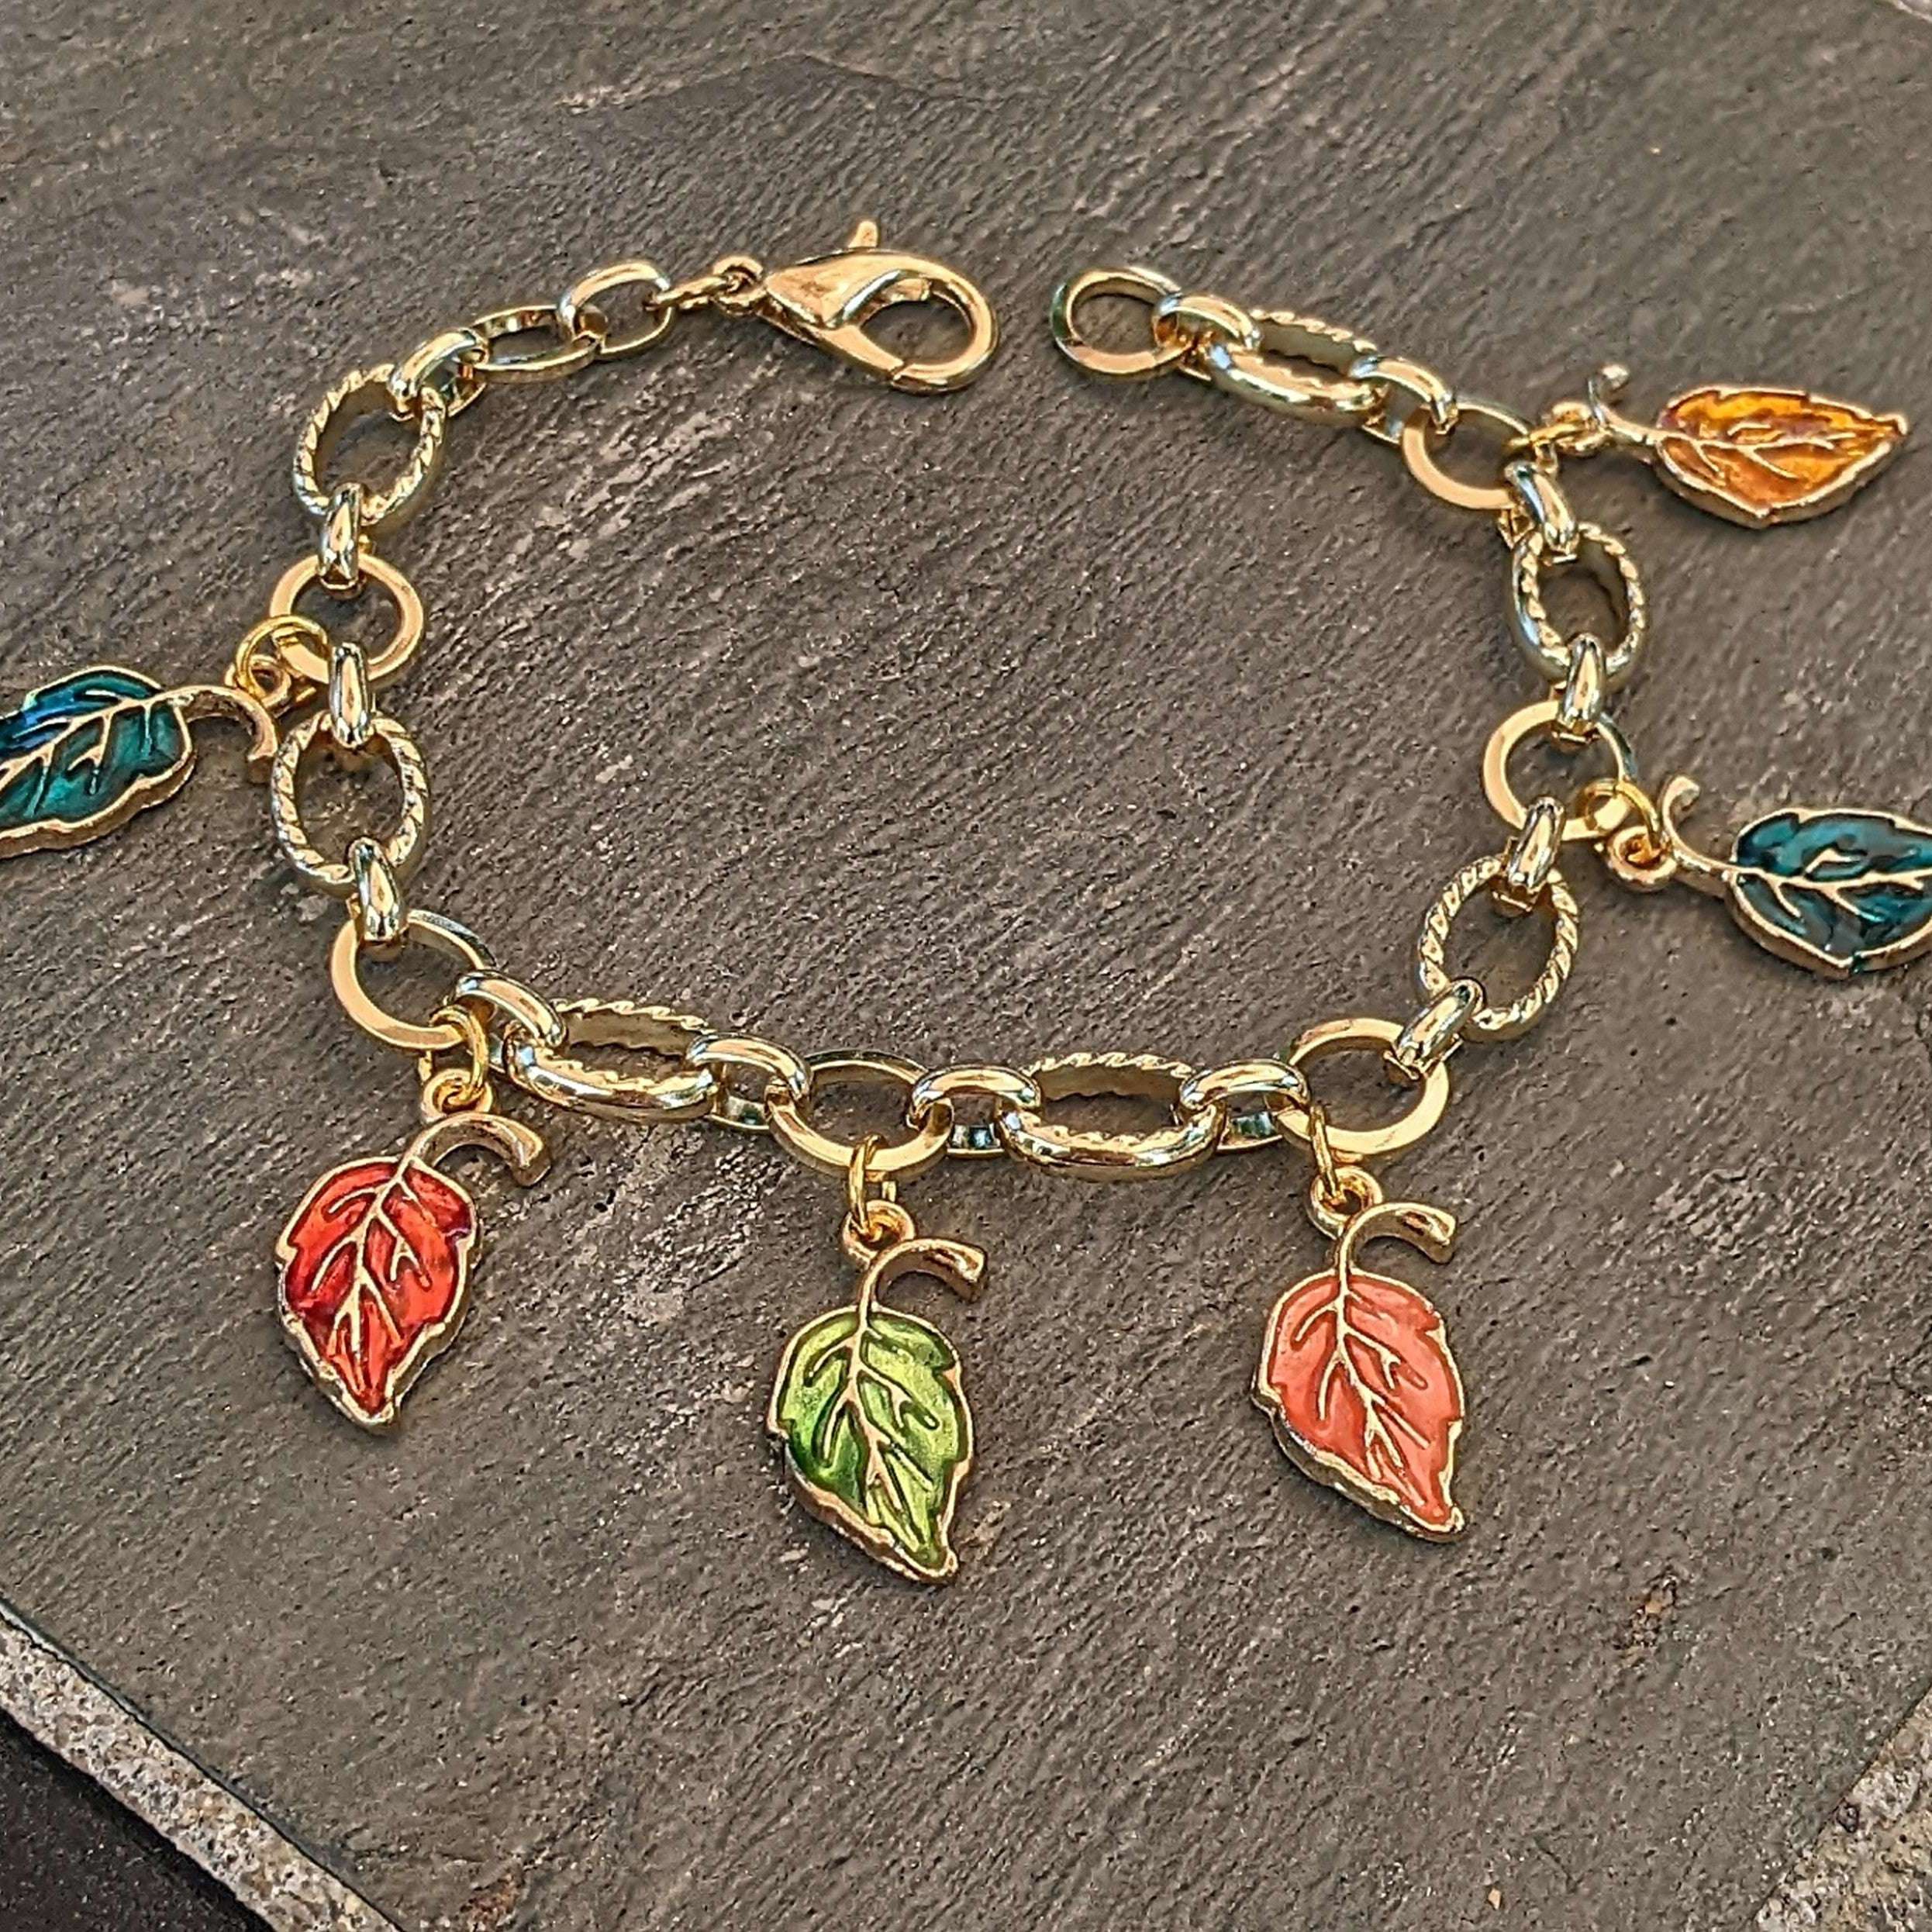 Festive Autumn Leaves Charm Bracelet Tutorial | How Was Your Day?